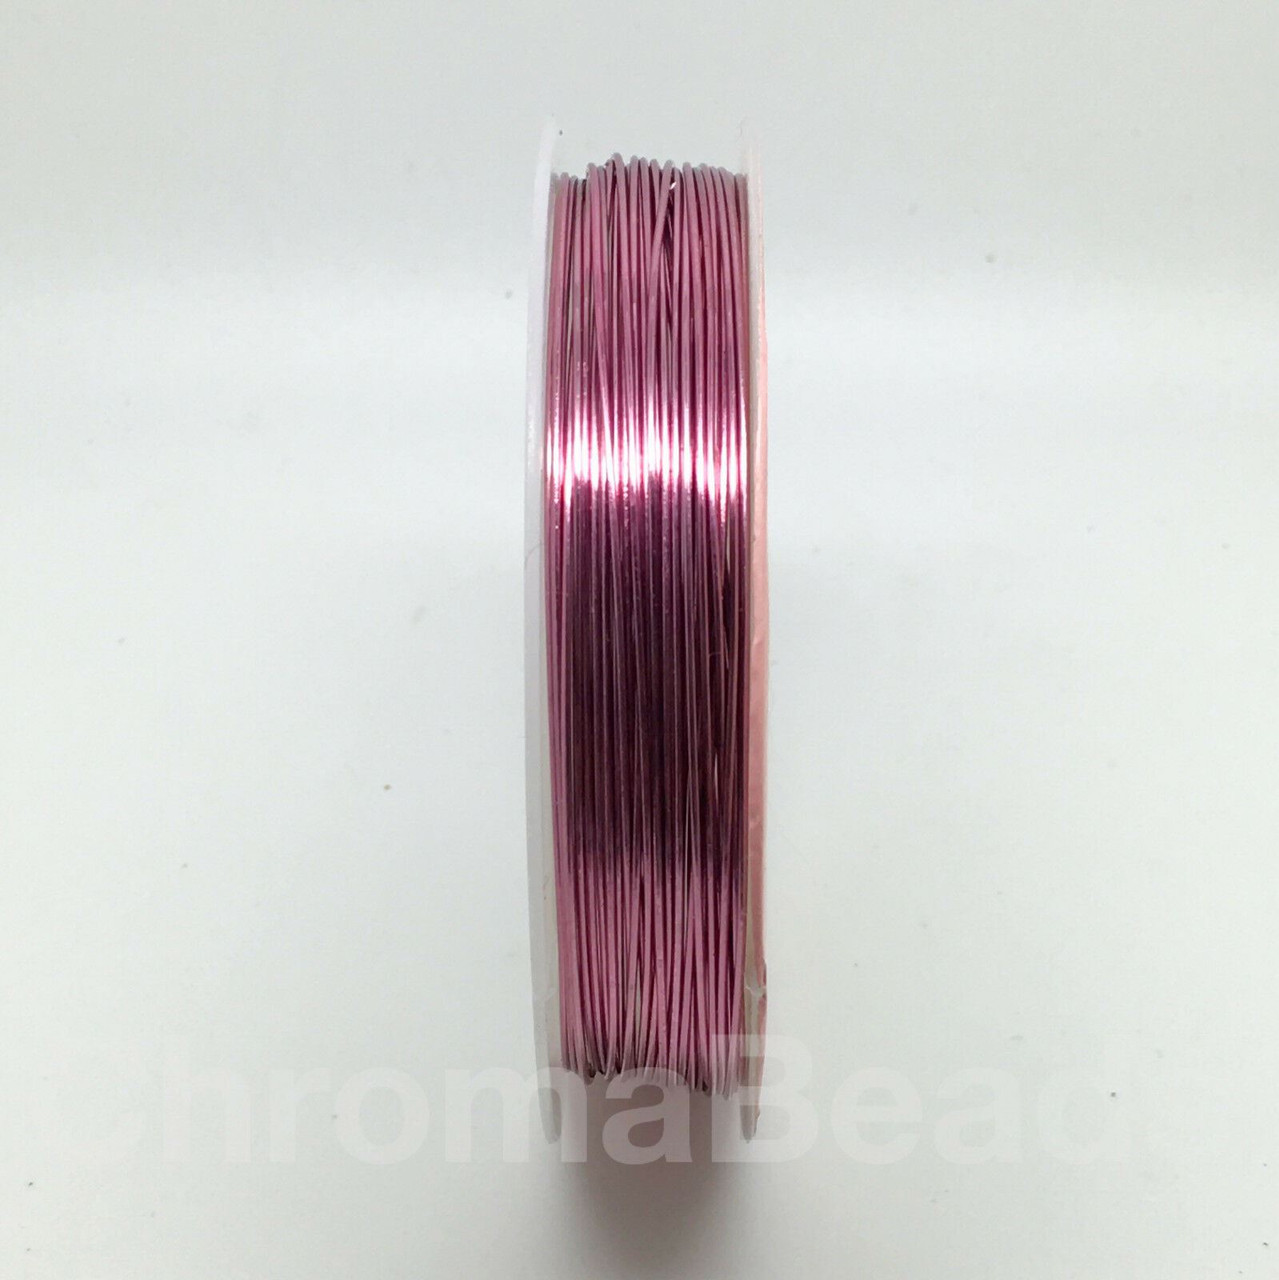 Roll of Copper Wire, 0.5mm thickness, PALE PINK colour, approx 9m length